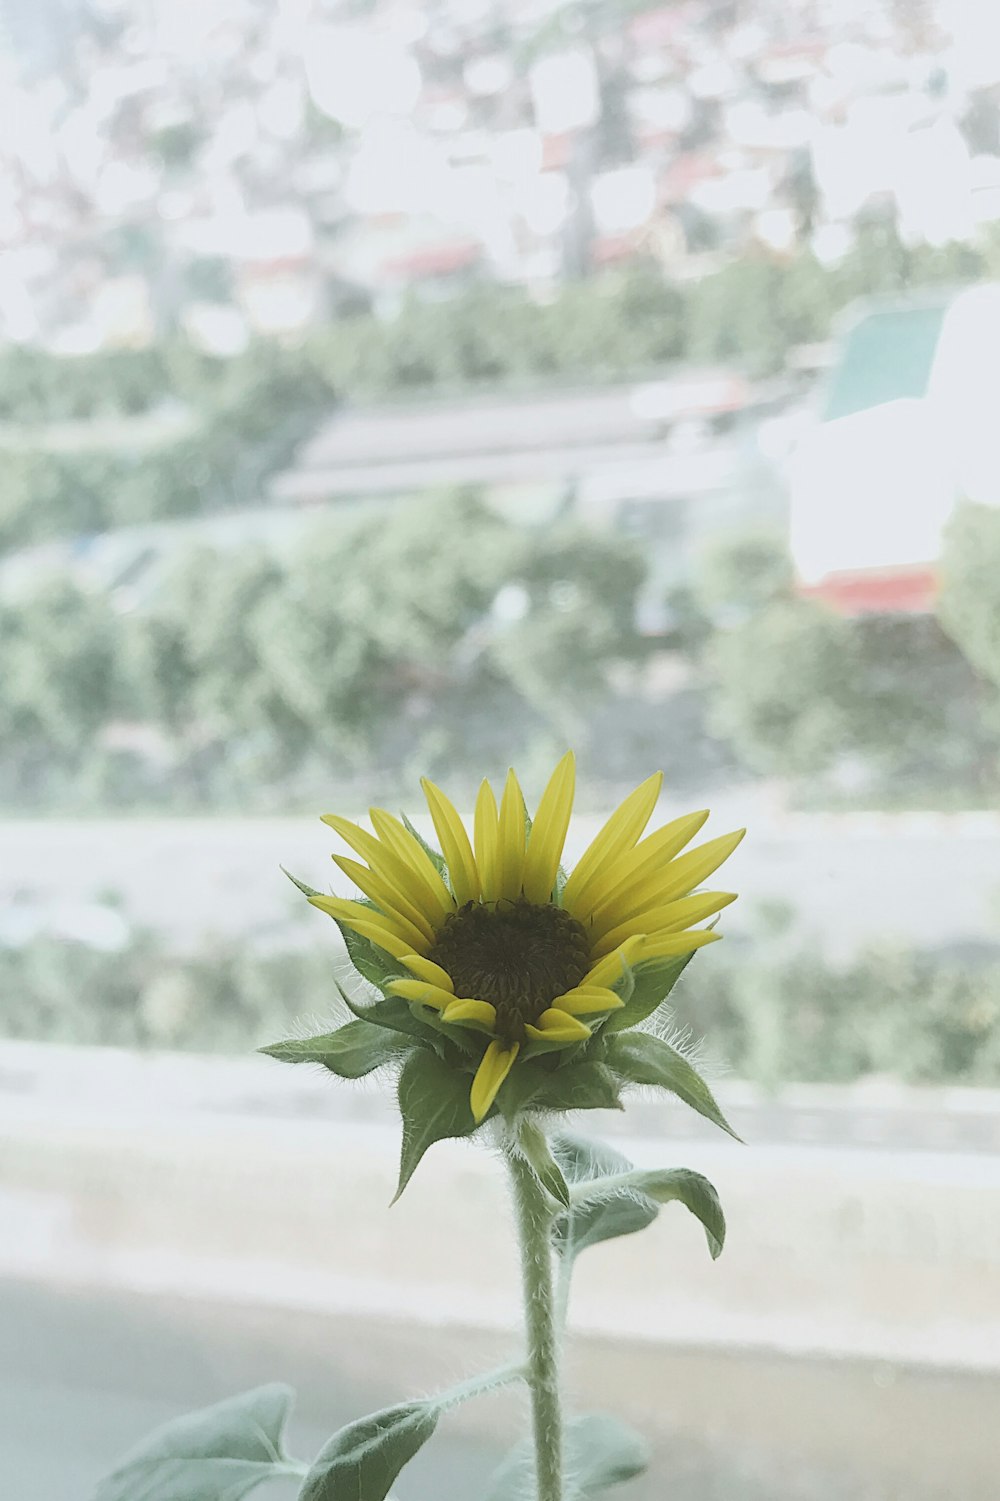 blooming sunflower at daytime